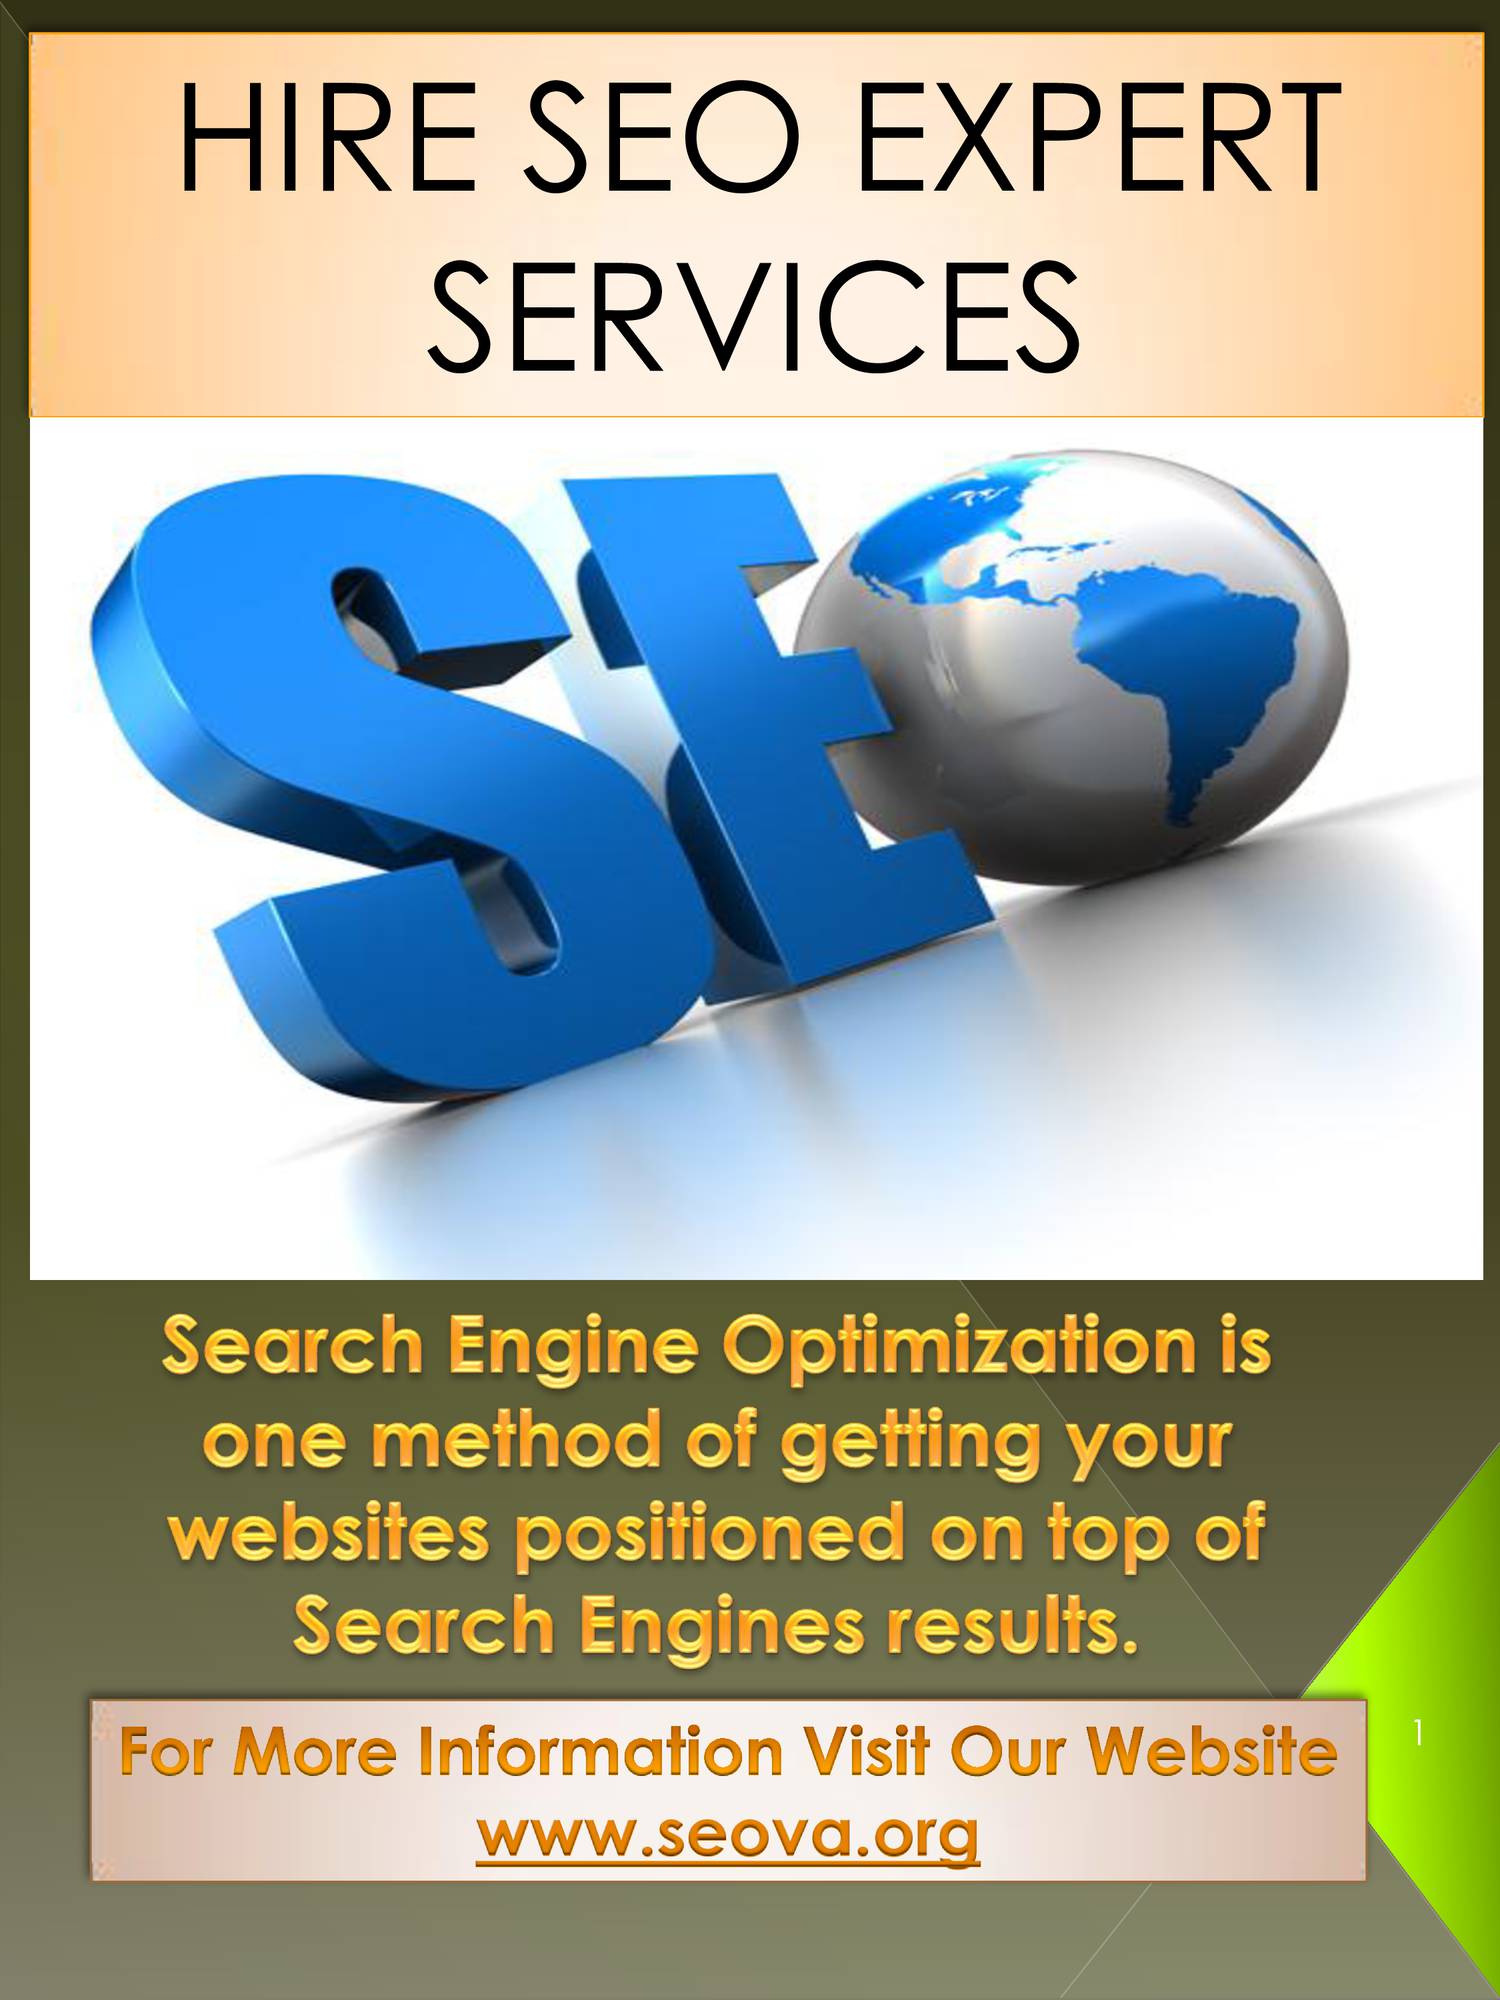 Choosing Efficient and Affordable SEO Services